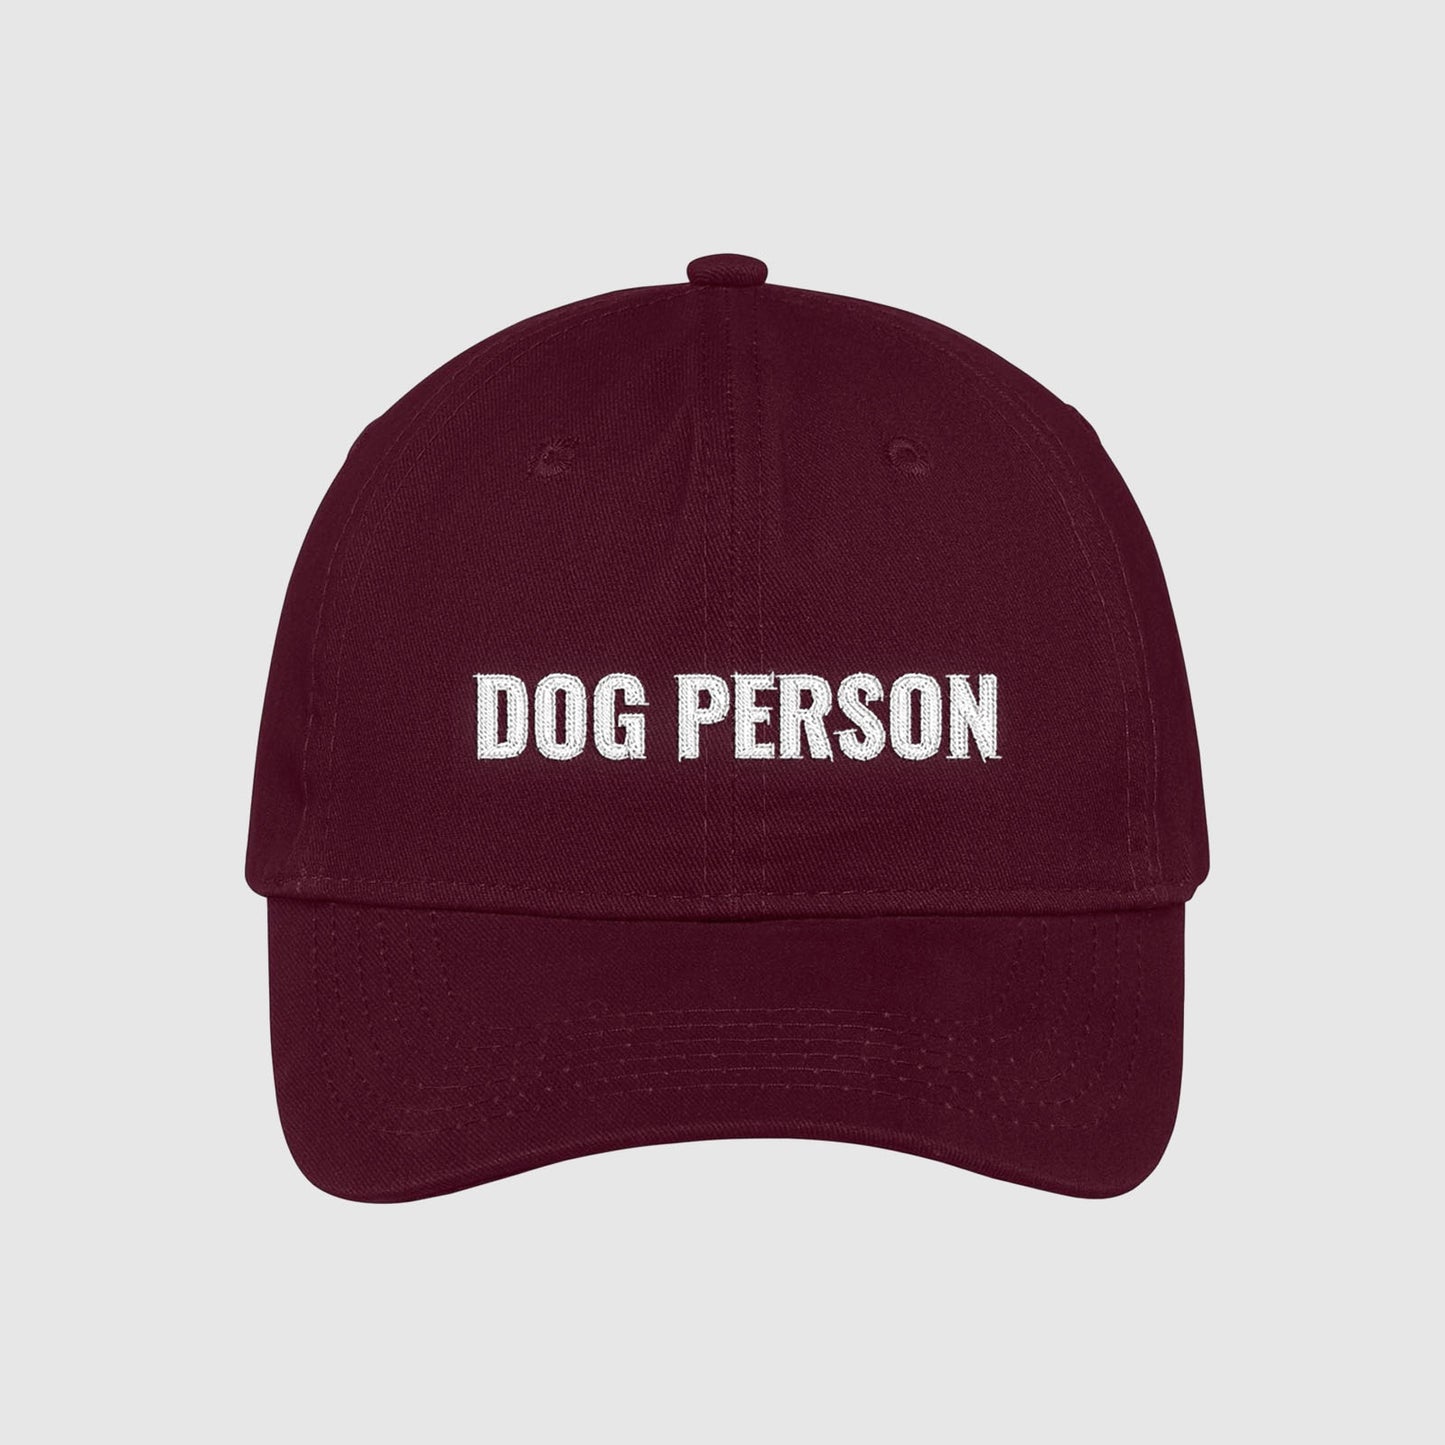 Maroon dad hat with Dog Person embroidered on the front with white thread.